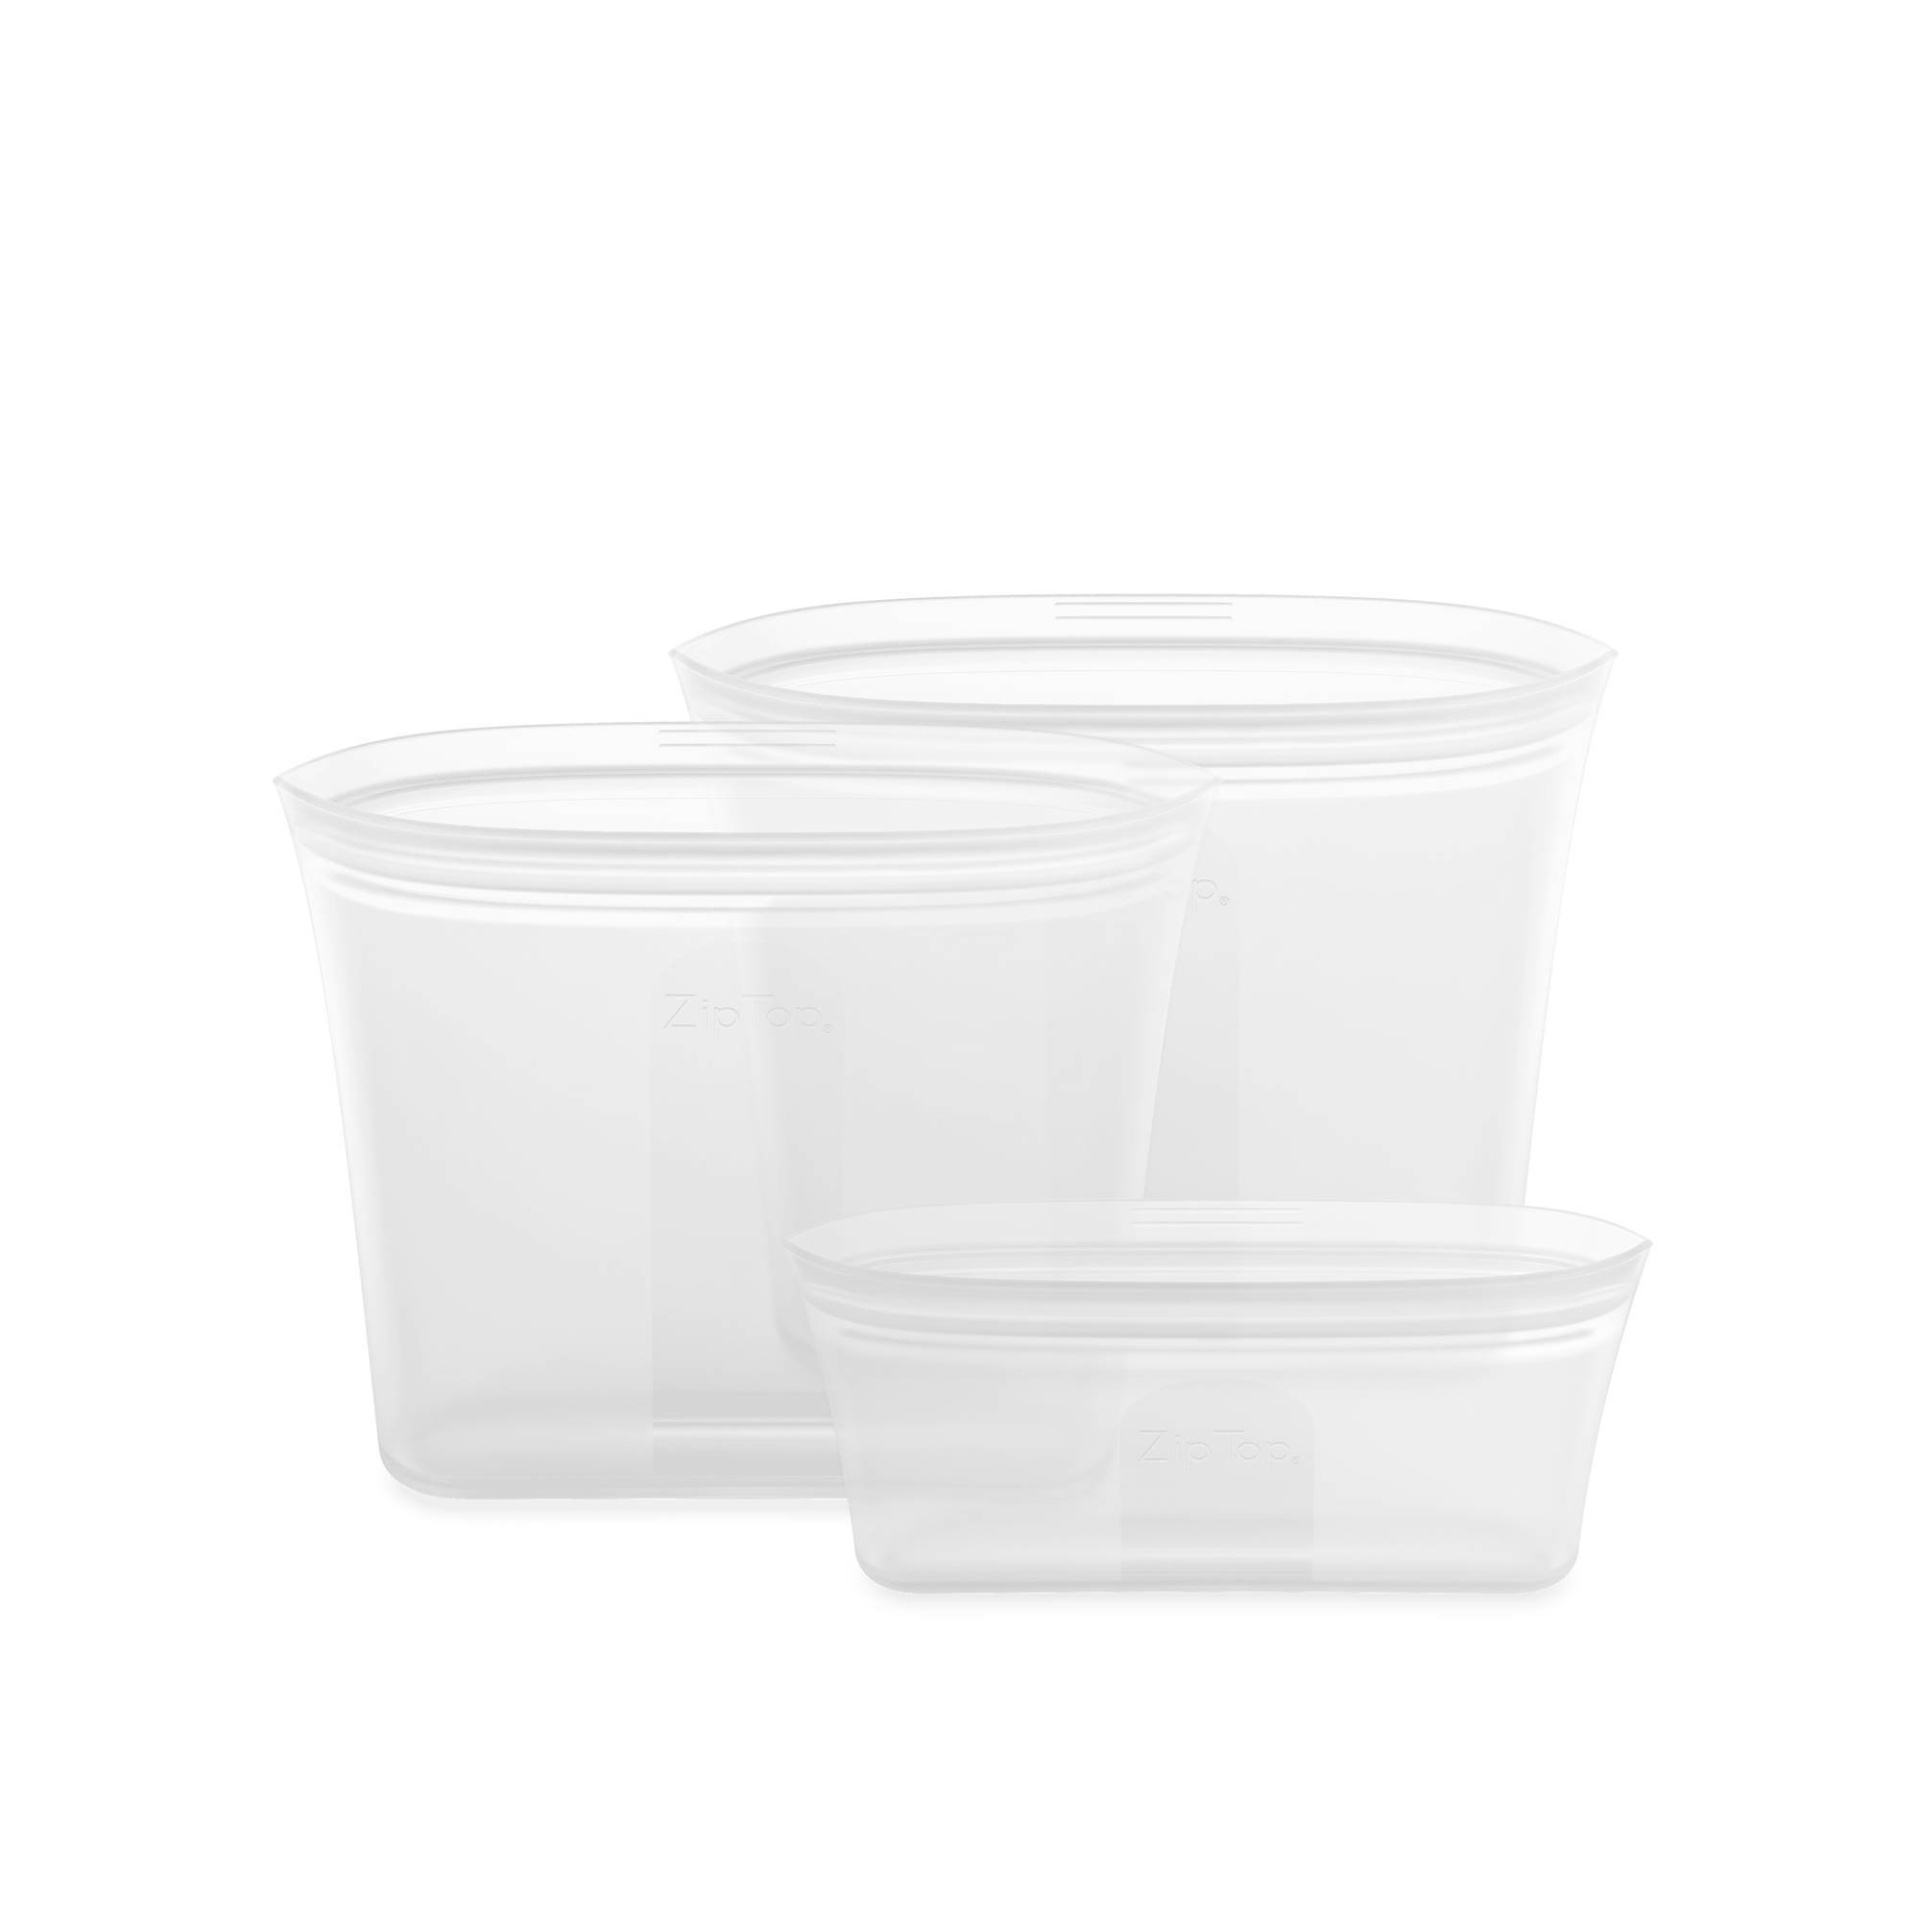 Zip Top - 100% Platinum Silicone Reusable Containers with NO Lids!